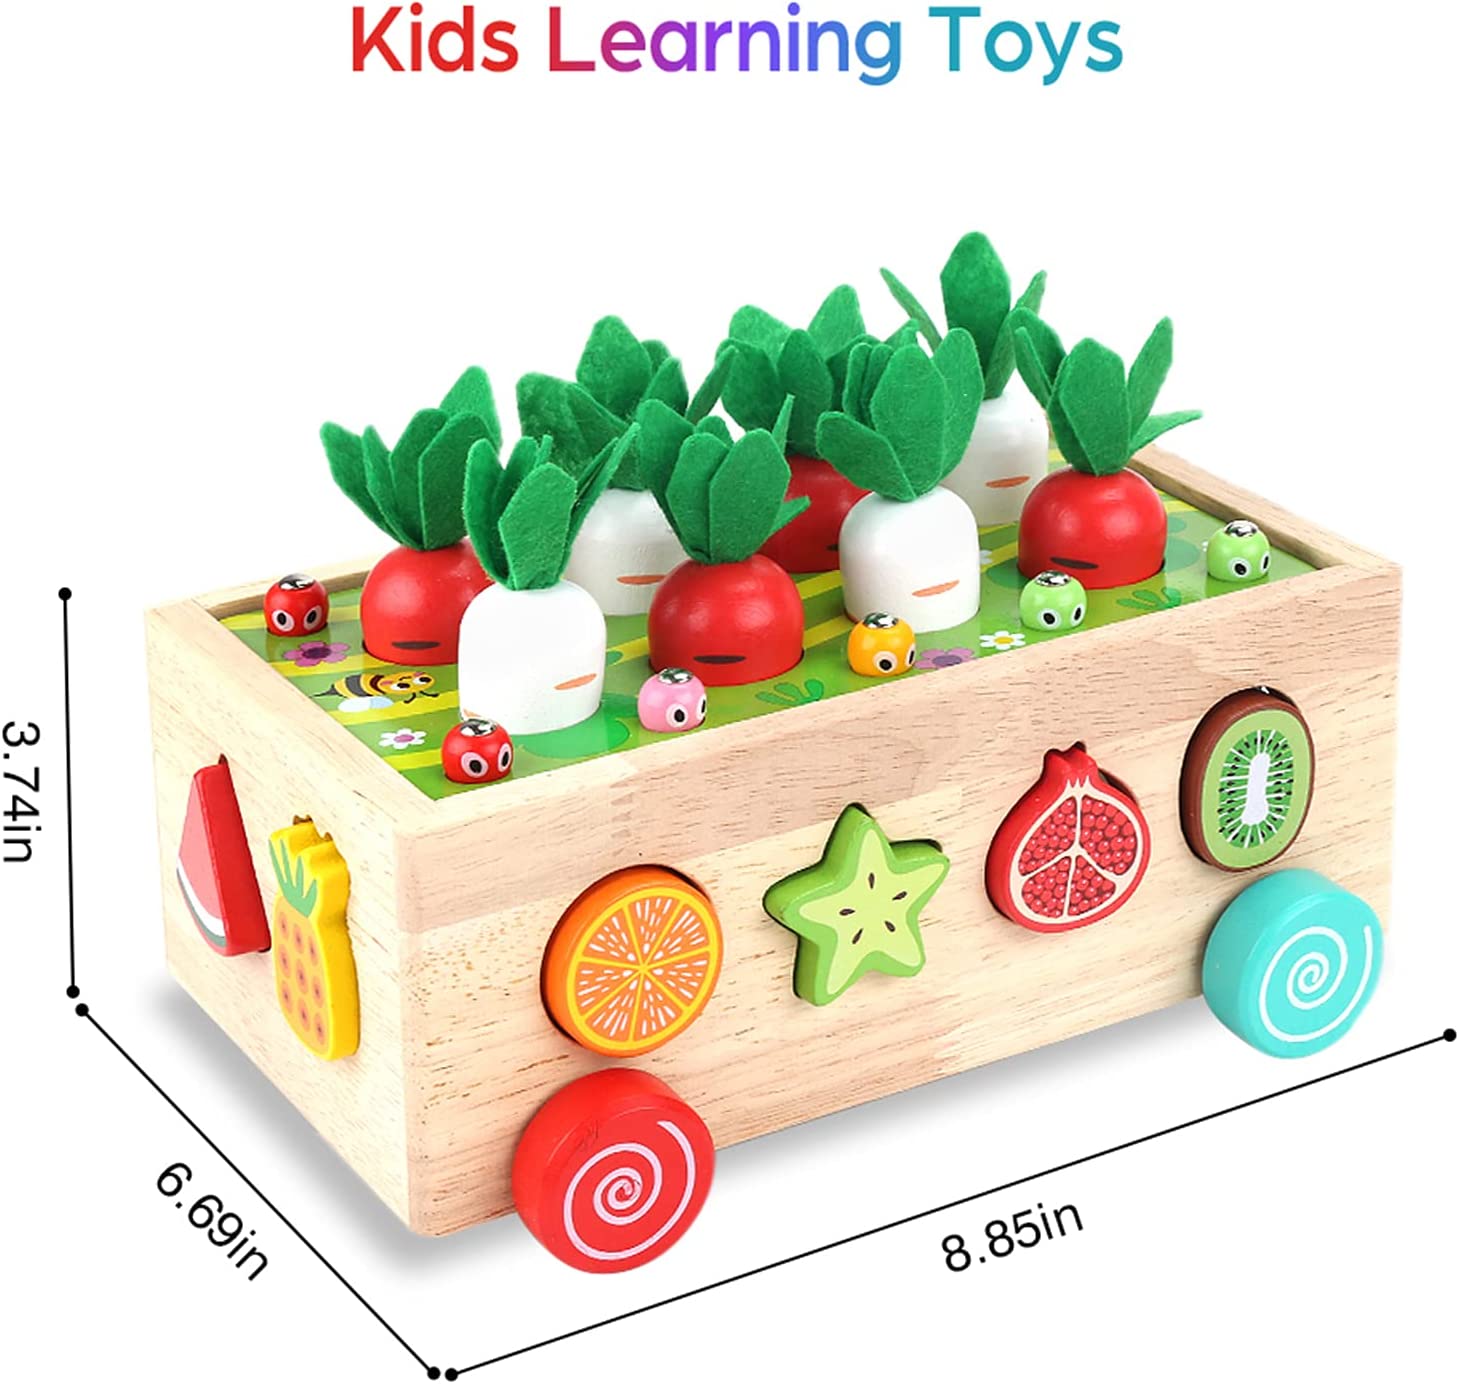 Toddlers Wooden Educational Toys for Baby Boys Girls Age 2 3 4 Year Old, Shape Sorting Toys Gifts for Kids 2-4, Wood Preschool Learning Fine Motor Skills Game